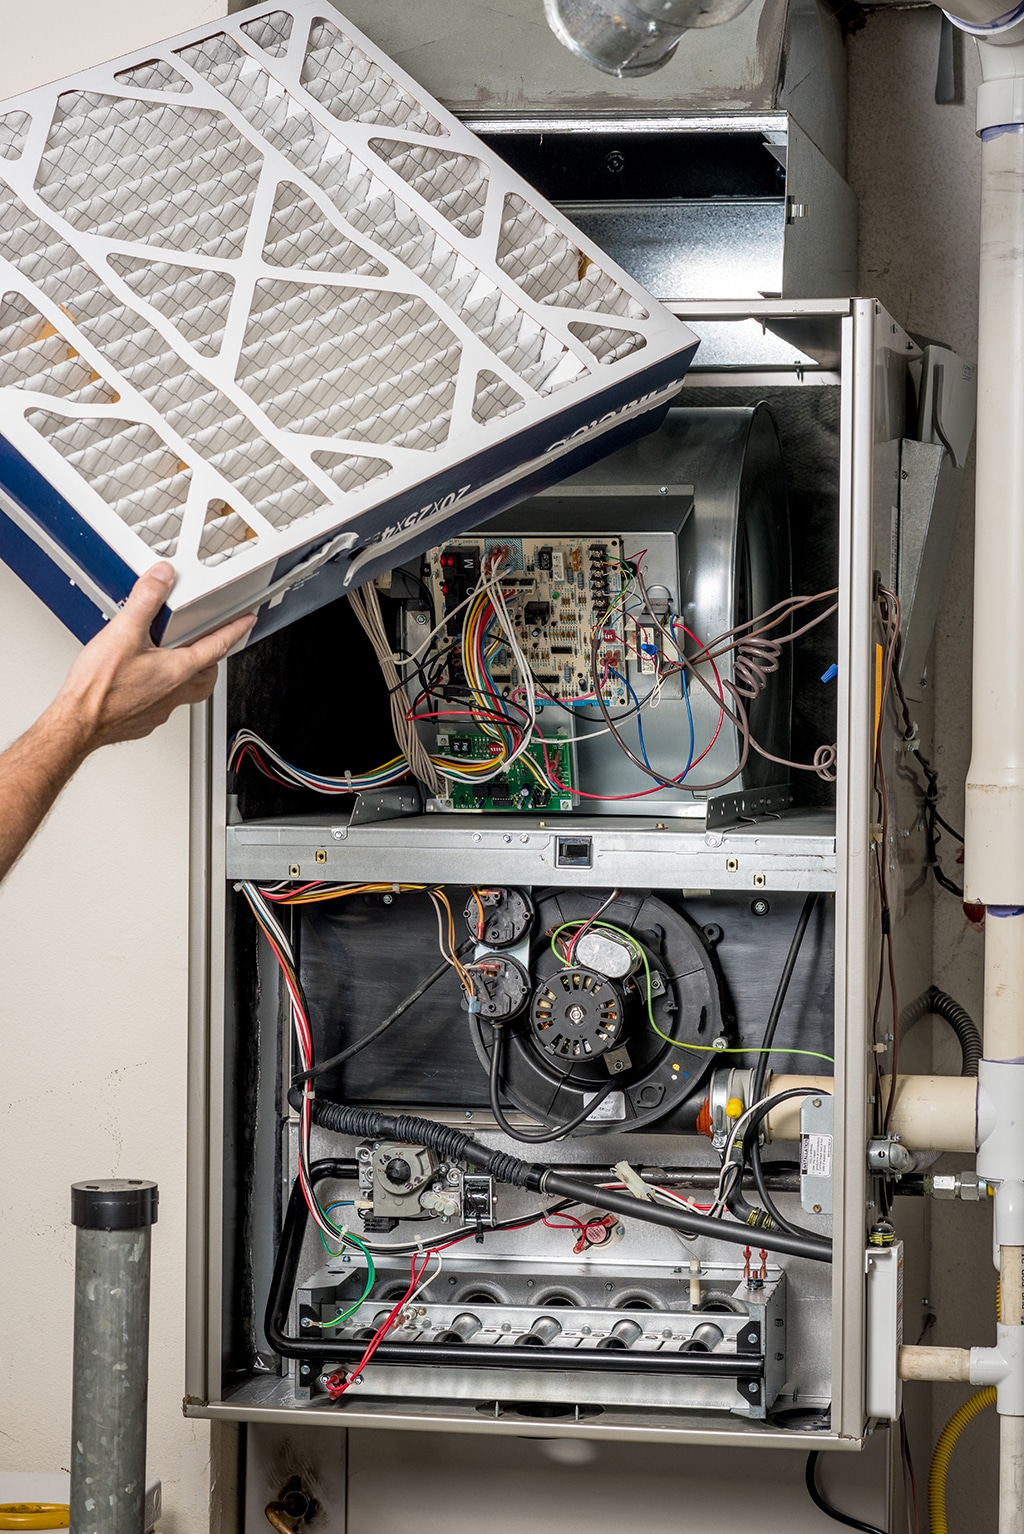 Furnace Repair: Top 18 Commonly Asked Questions About Your Furnace | Dallas, TX